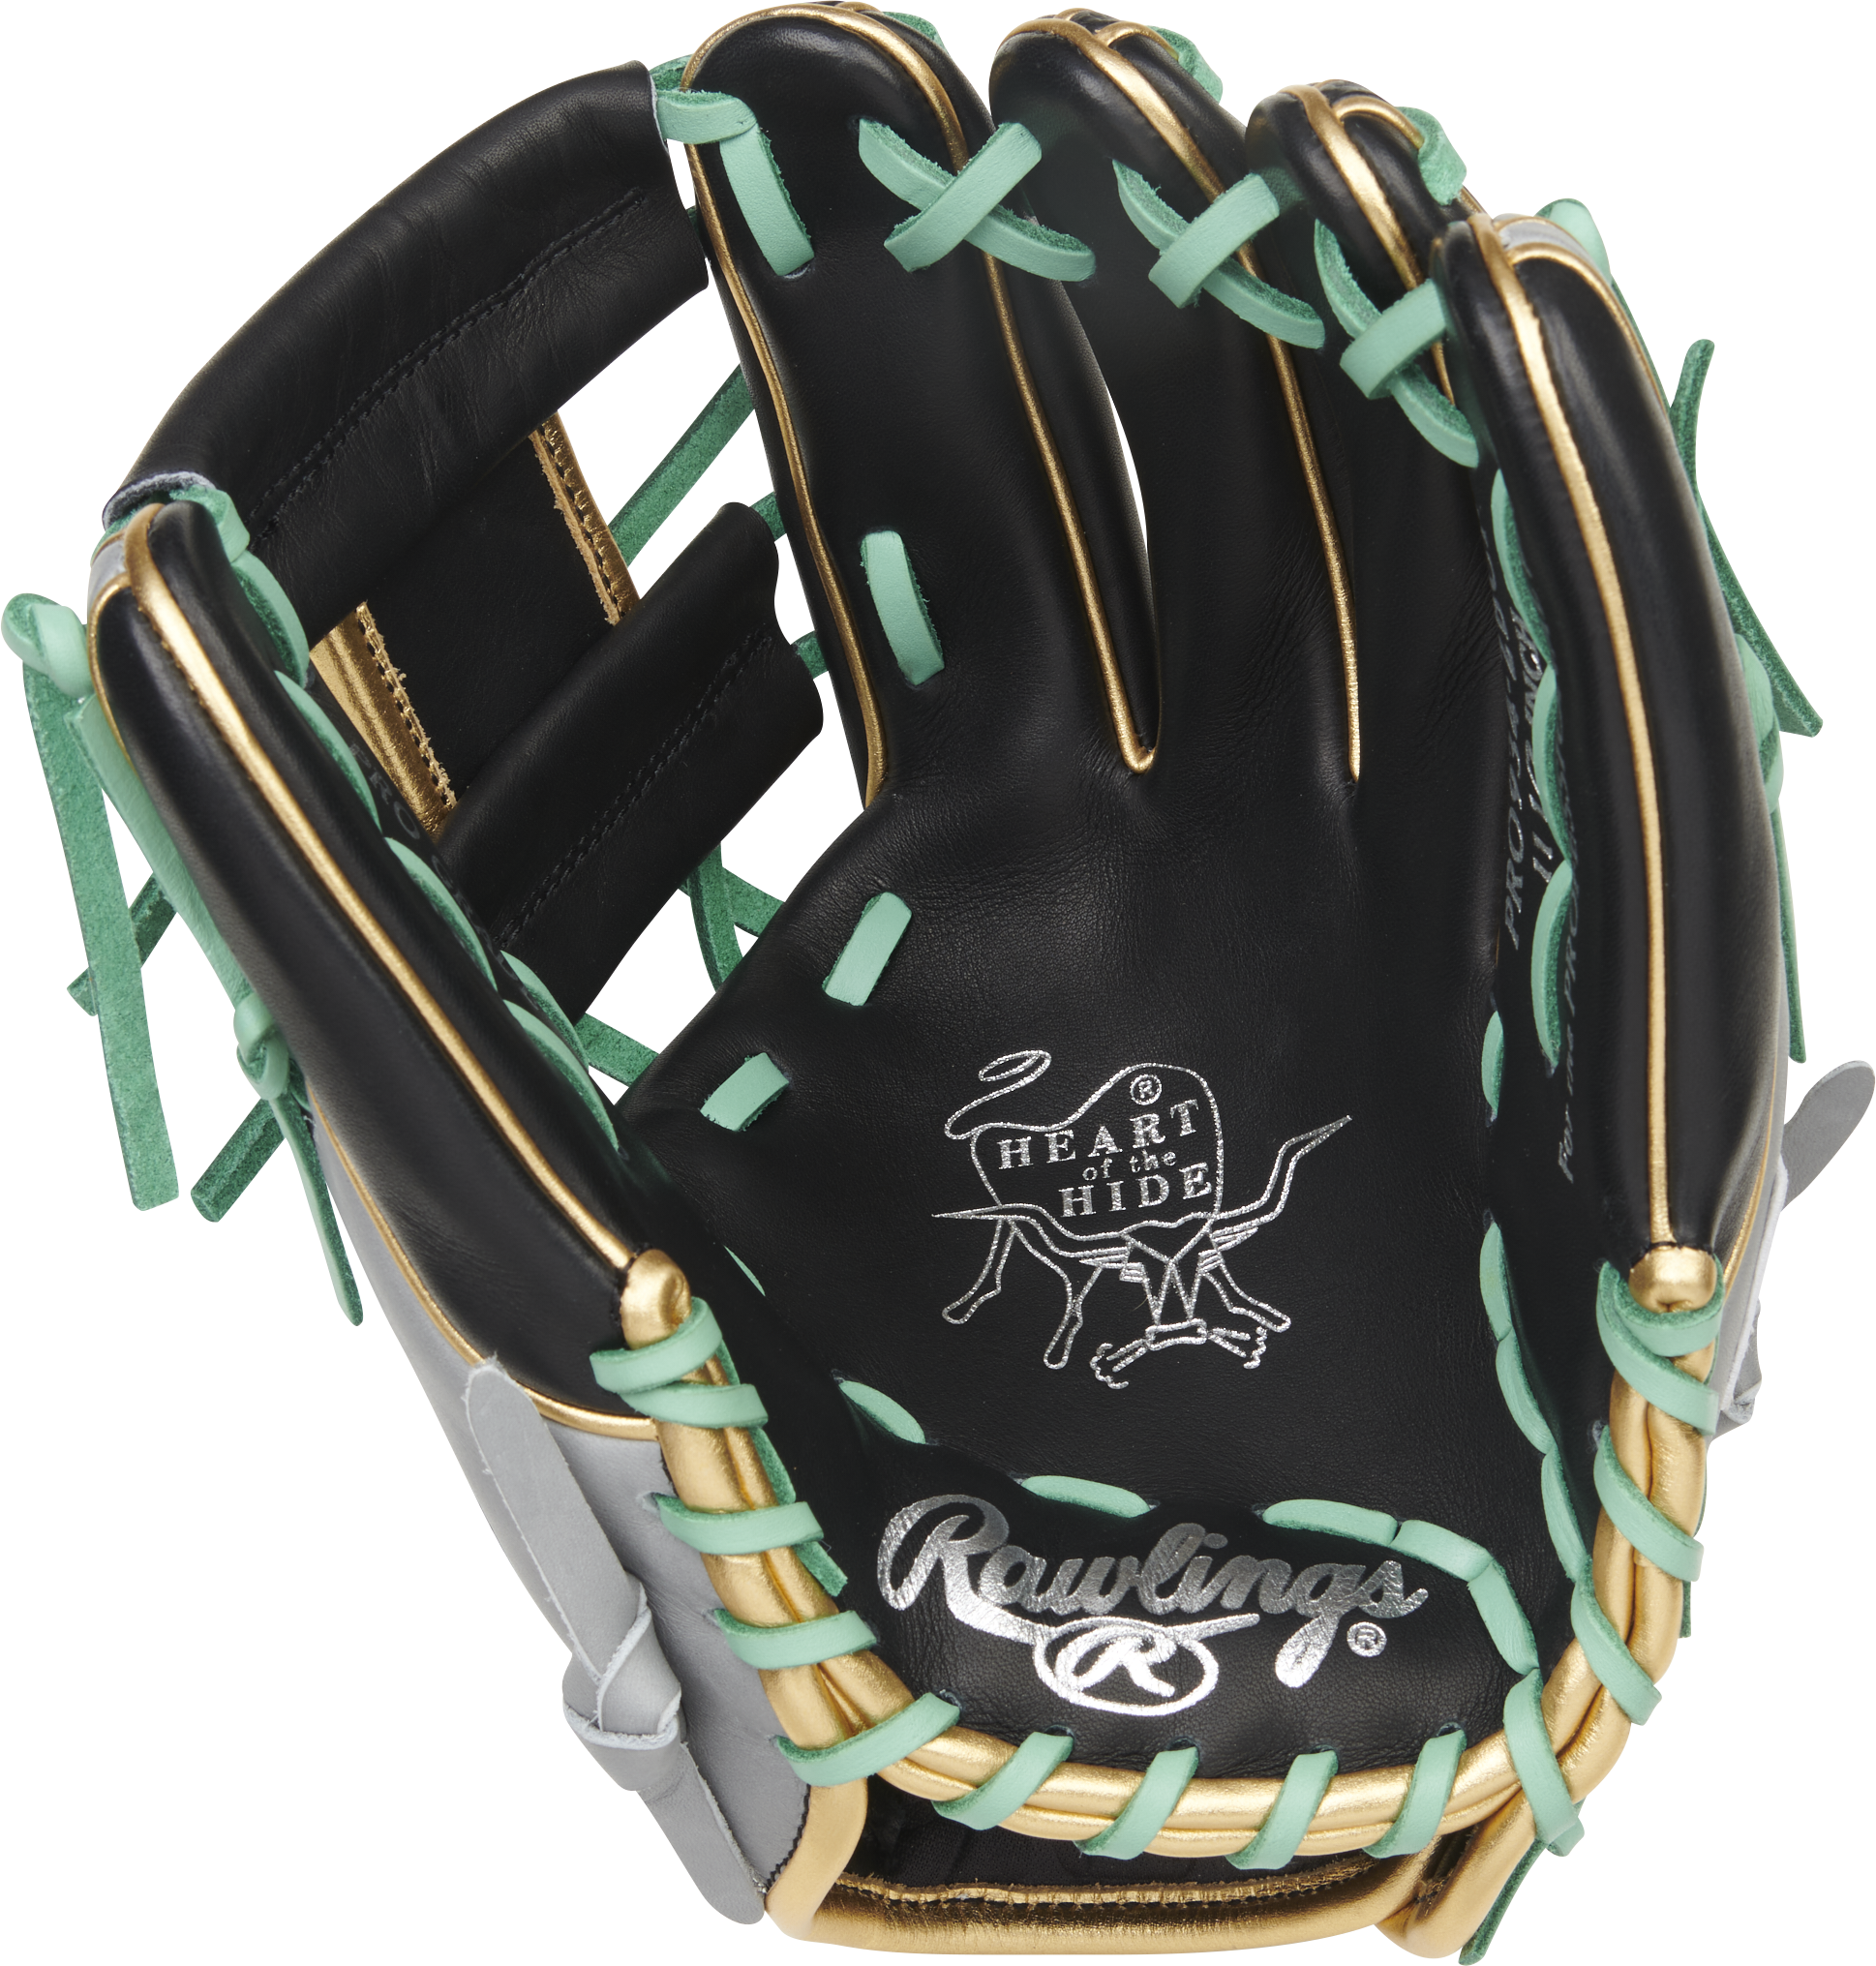 Rawlings April 2022 Gold Glove Club RGGC (GOTM) 11.5-inch Infield Heart of the Hide PRO934-2BCF